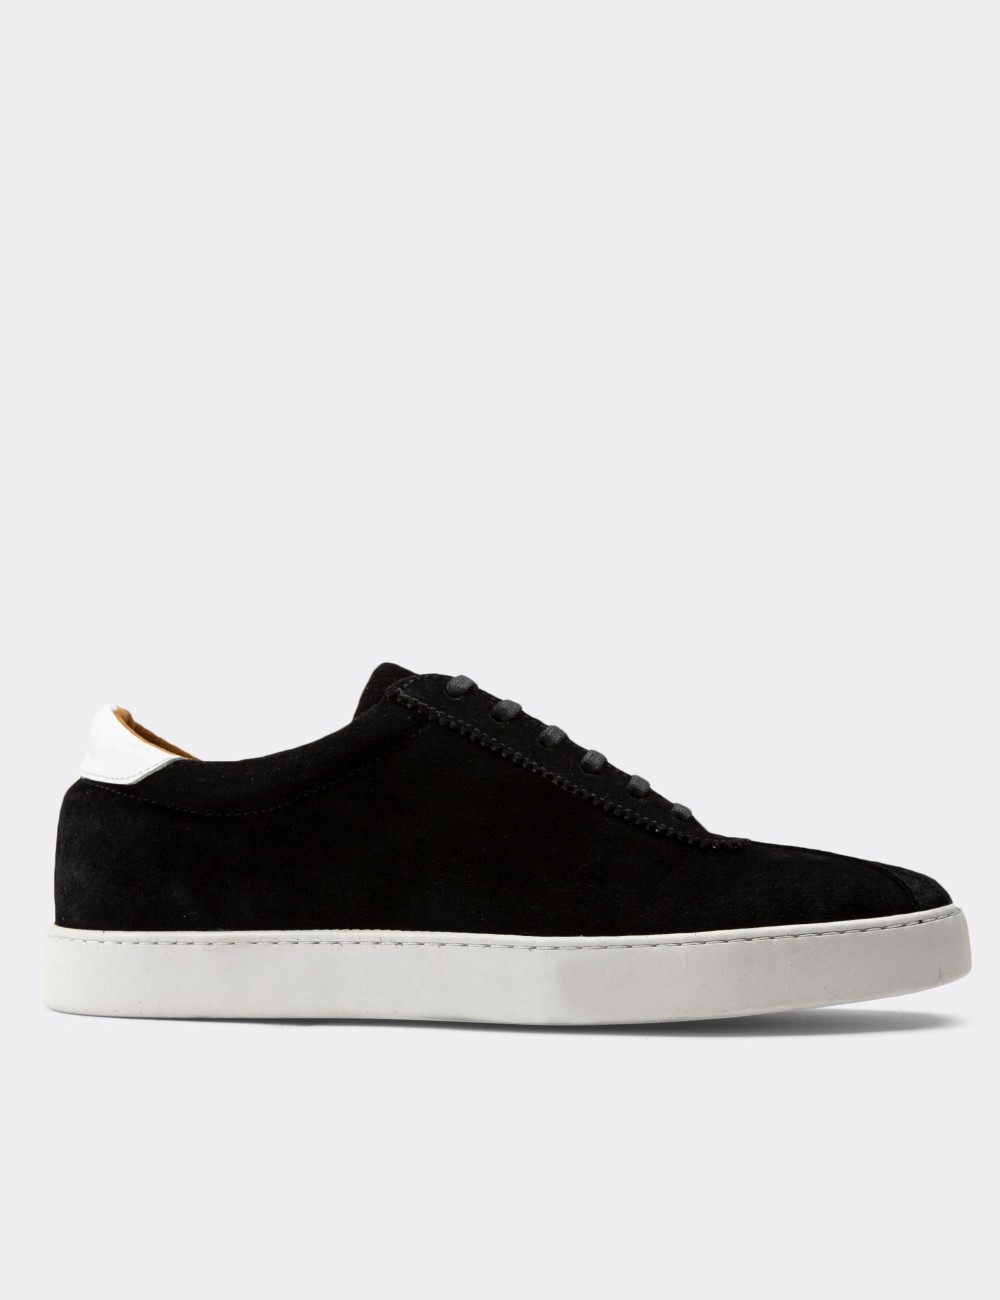 Black Suede Leather Sneakers - 01885MSYHC01